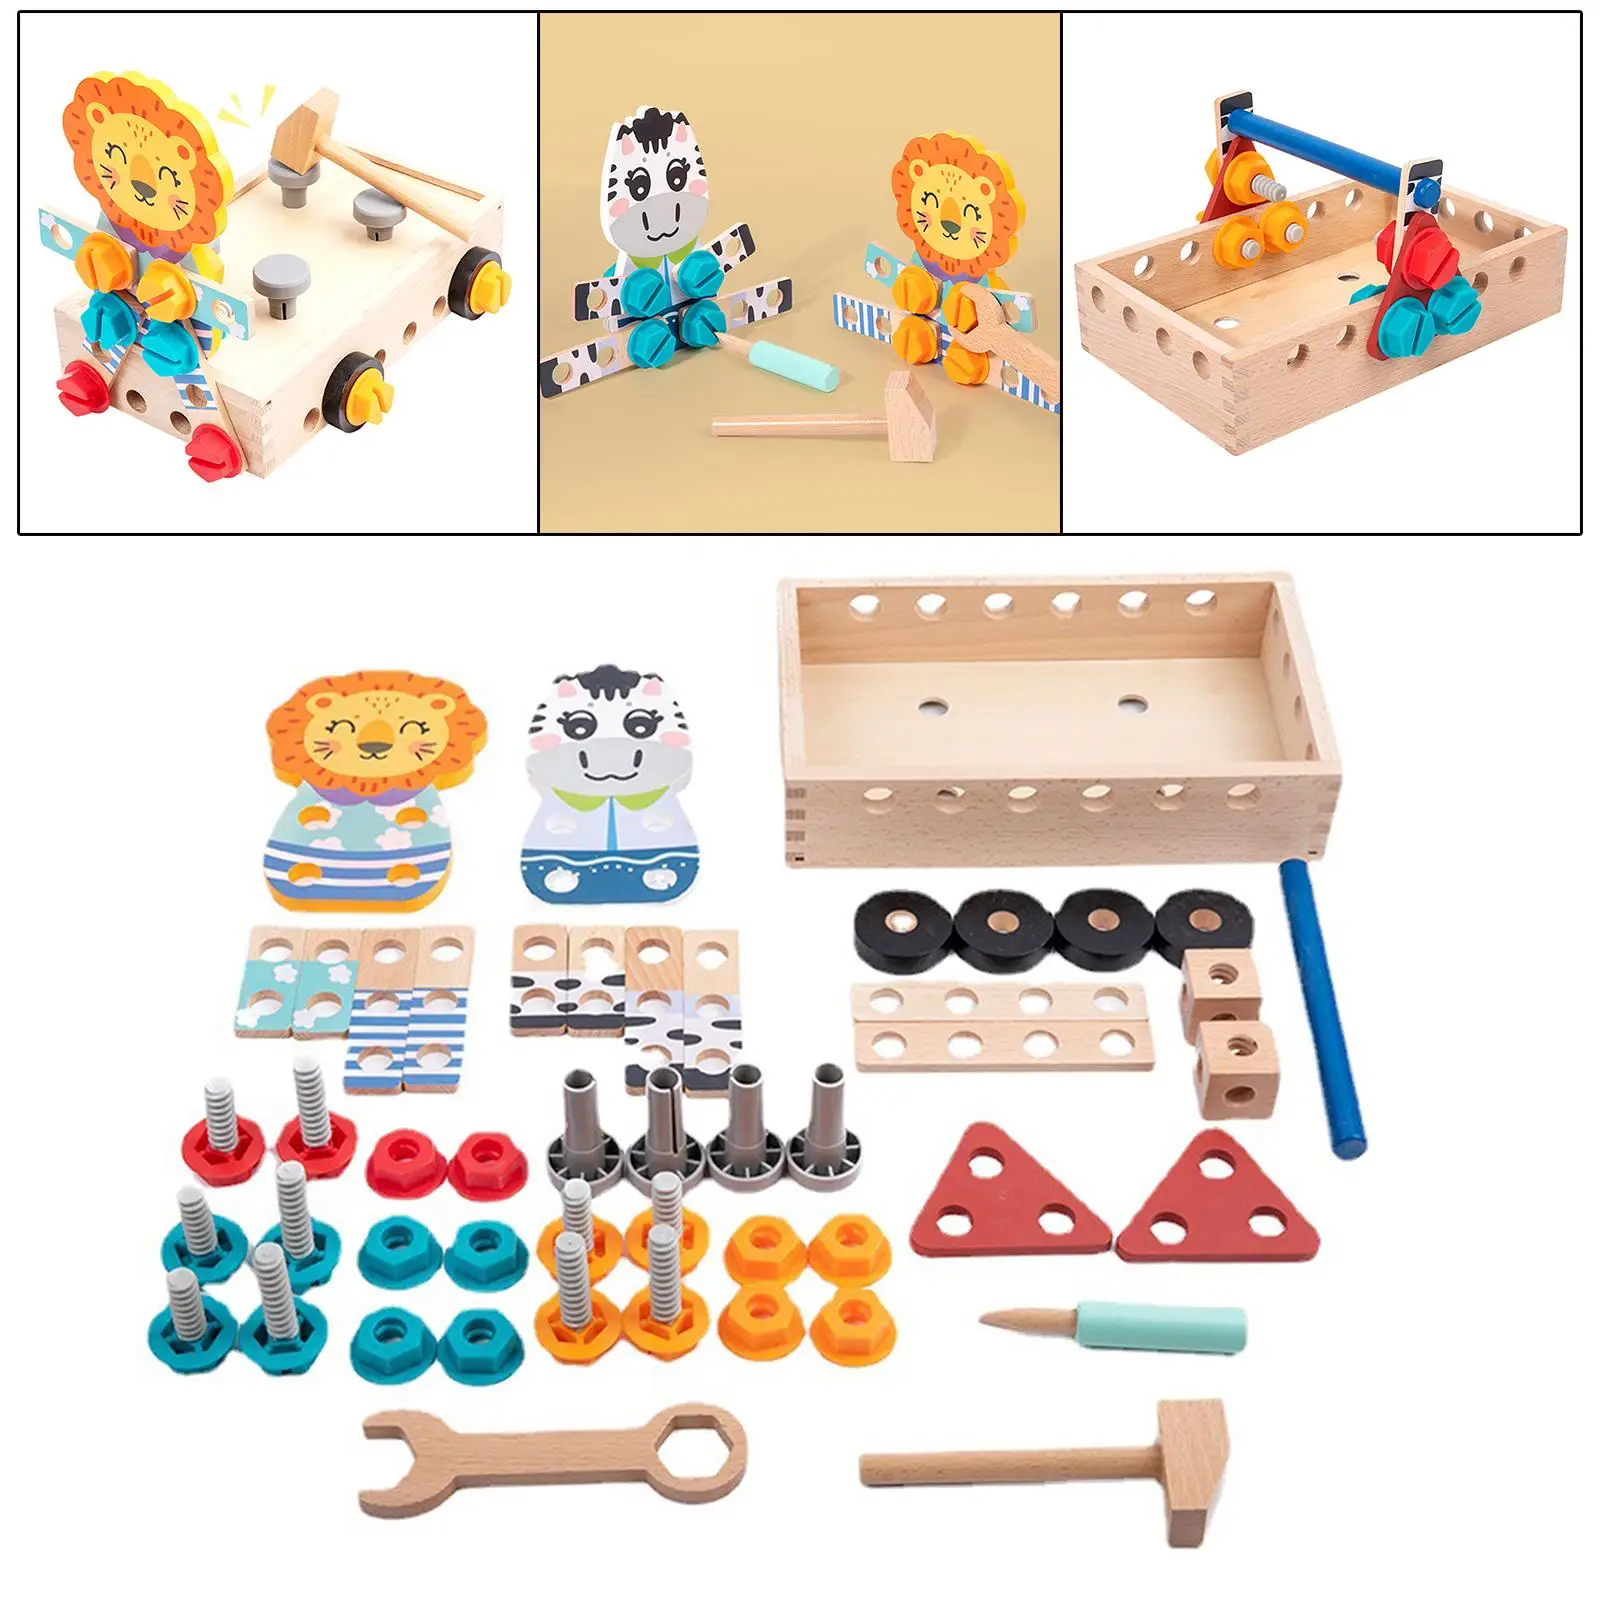 Pretend Game Toolbox DIY Construction Toy for Role education Preschool